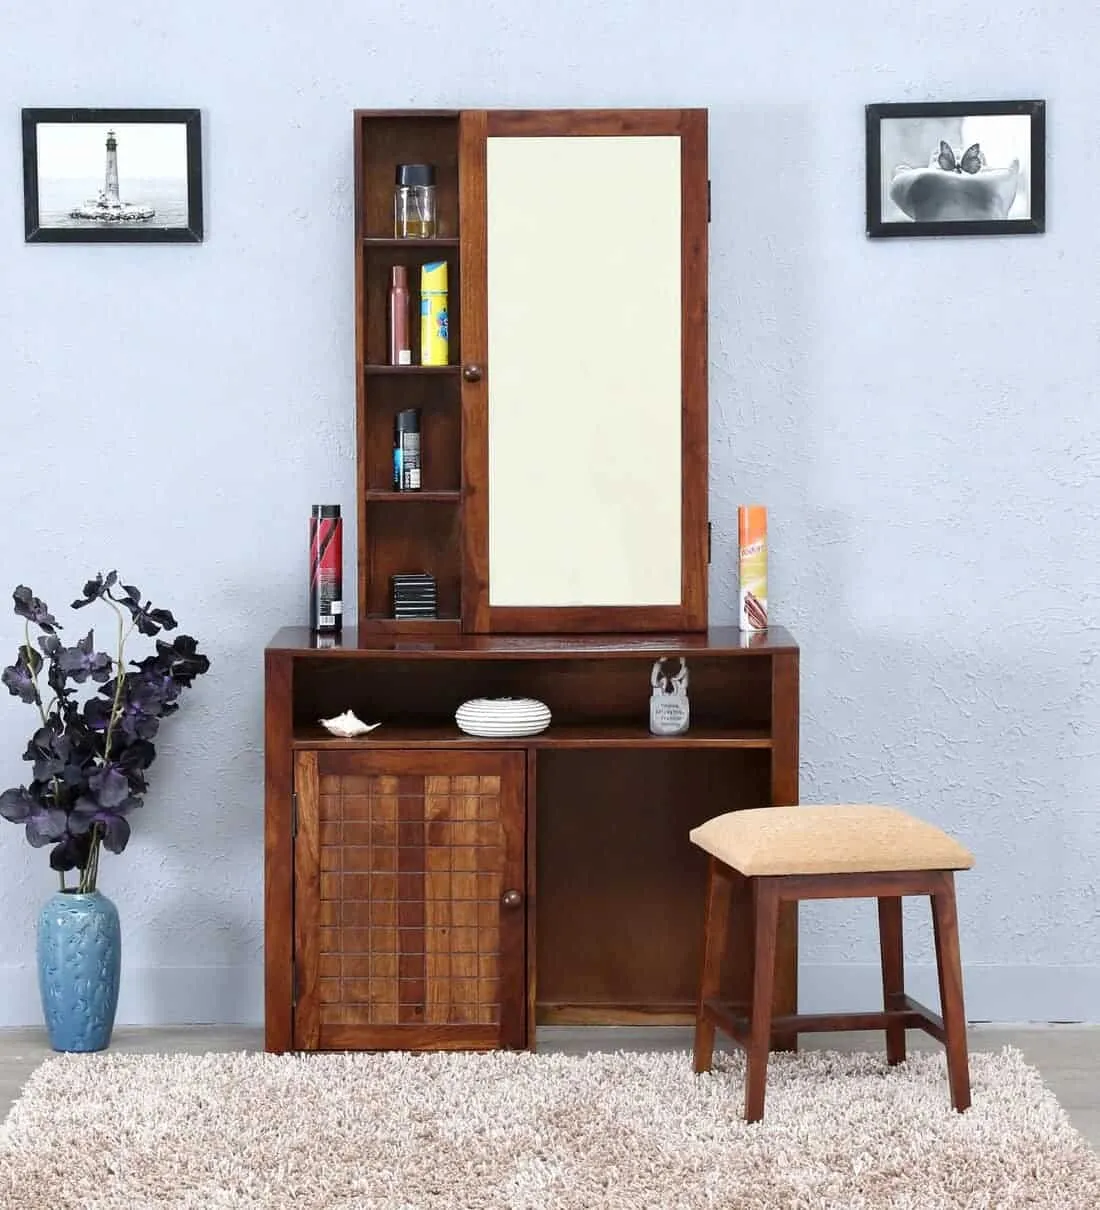 A beautiful wooden vanity with a rectangular mirror, good storage space, and a matching stool, in a blue-colored room.